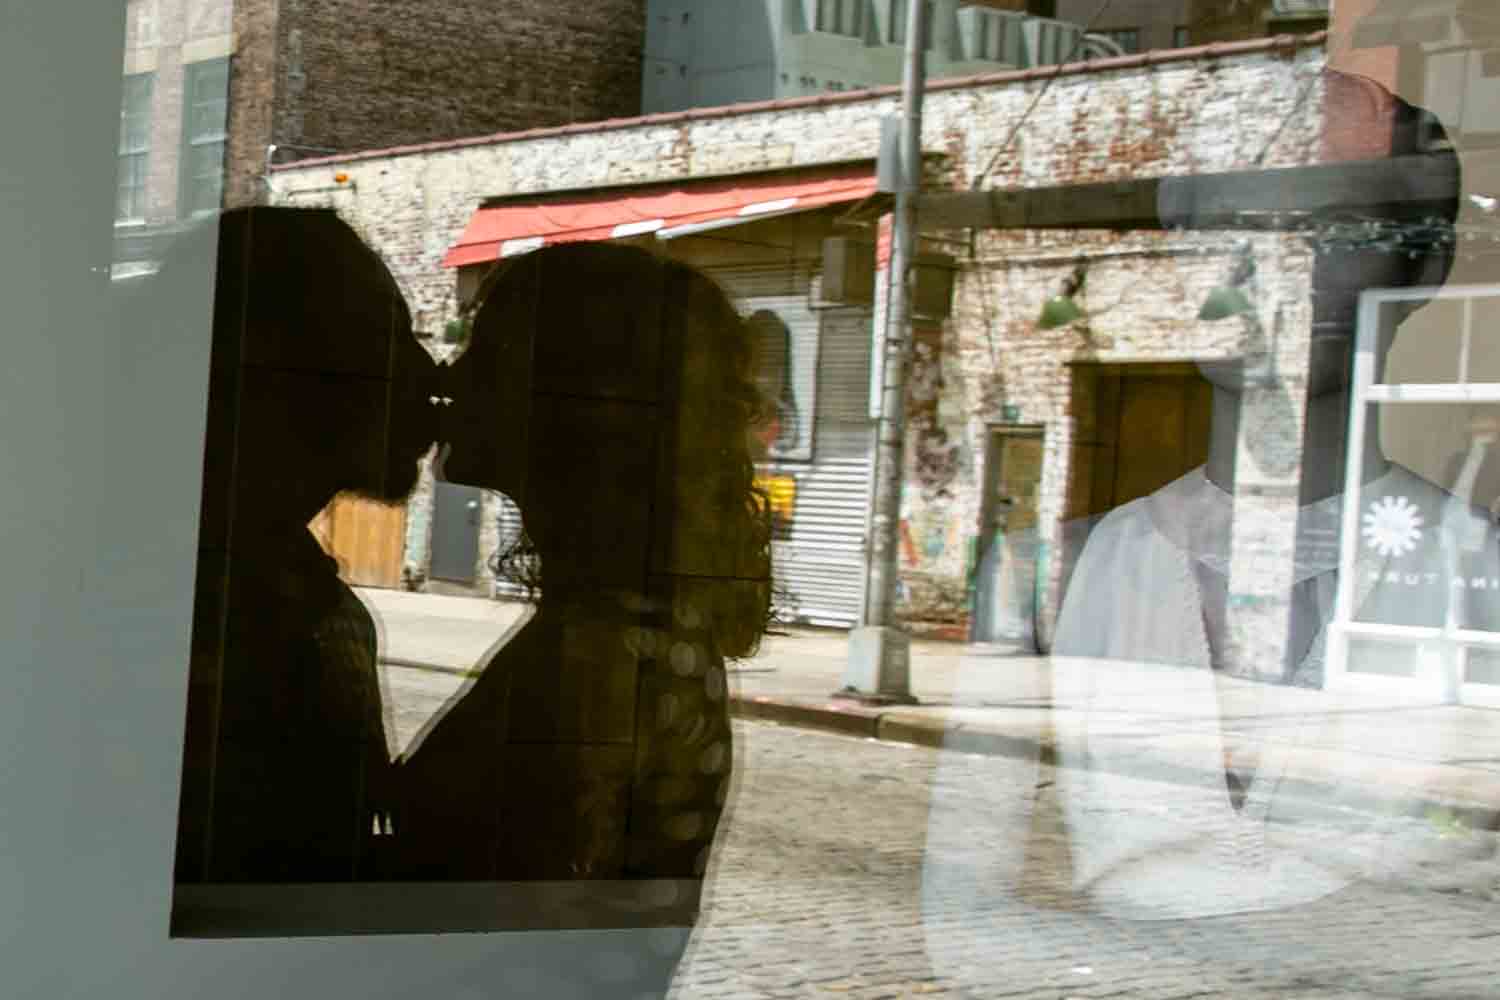 Reflection in window of couple kissing